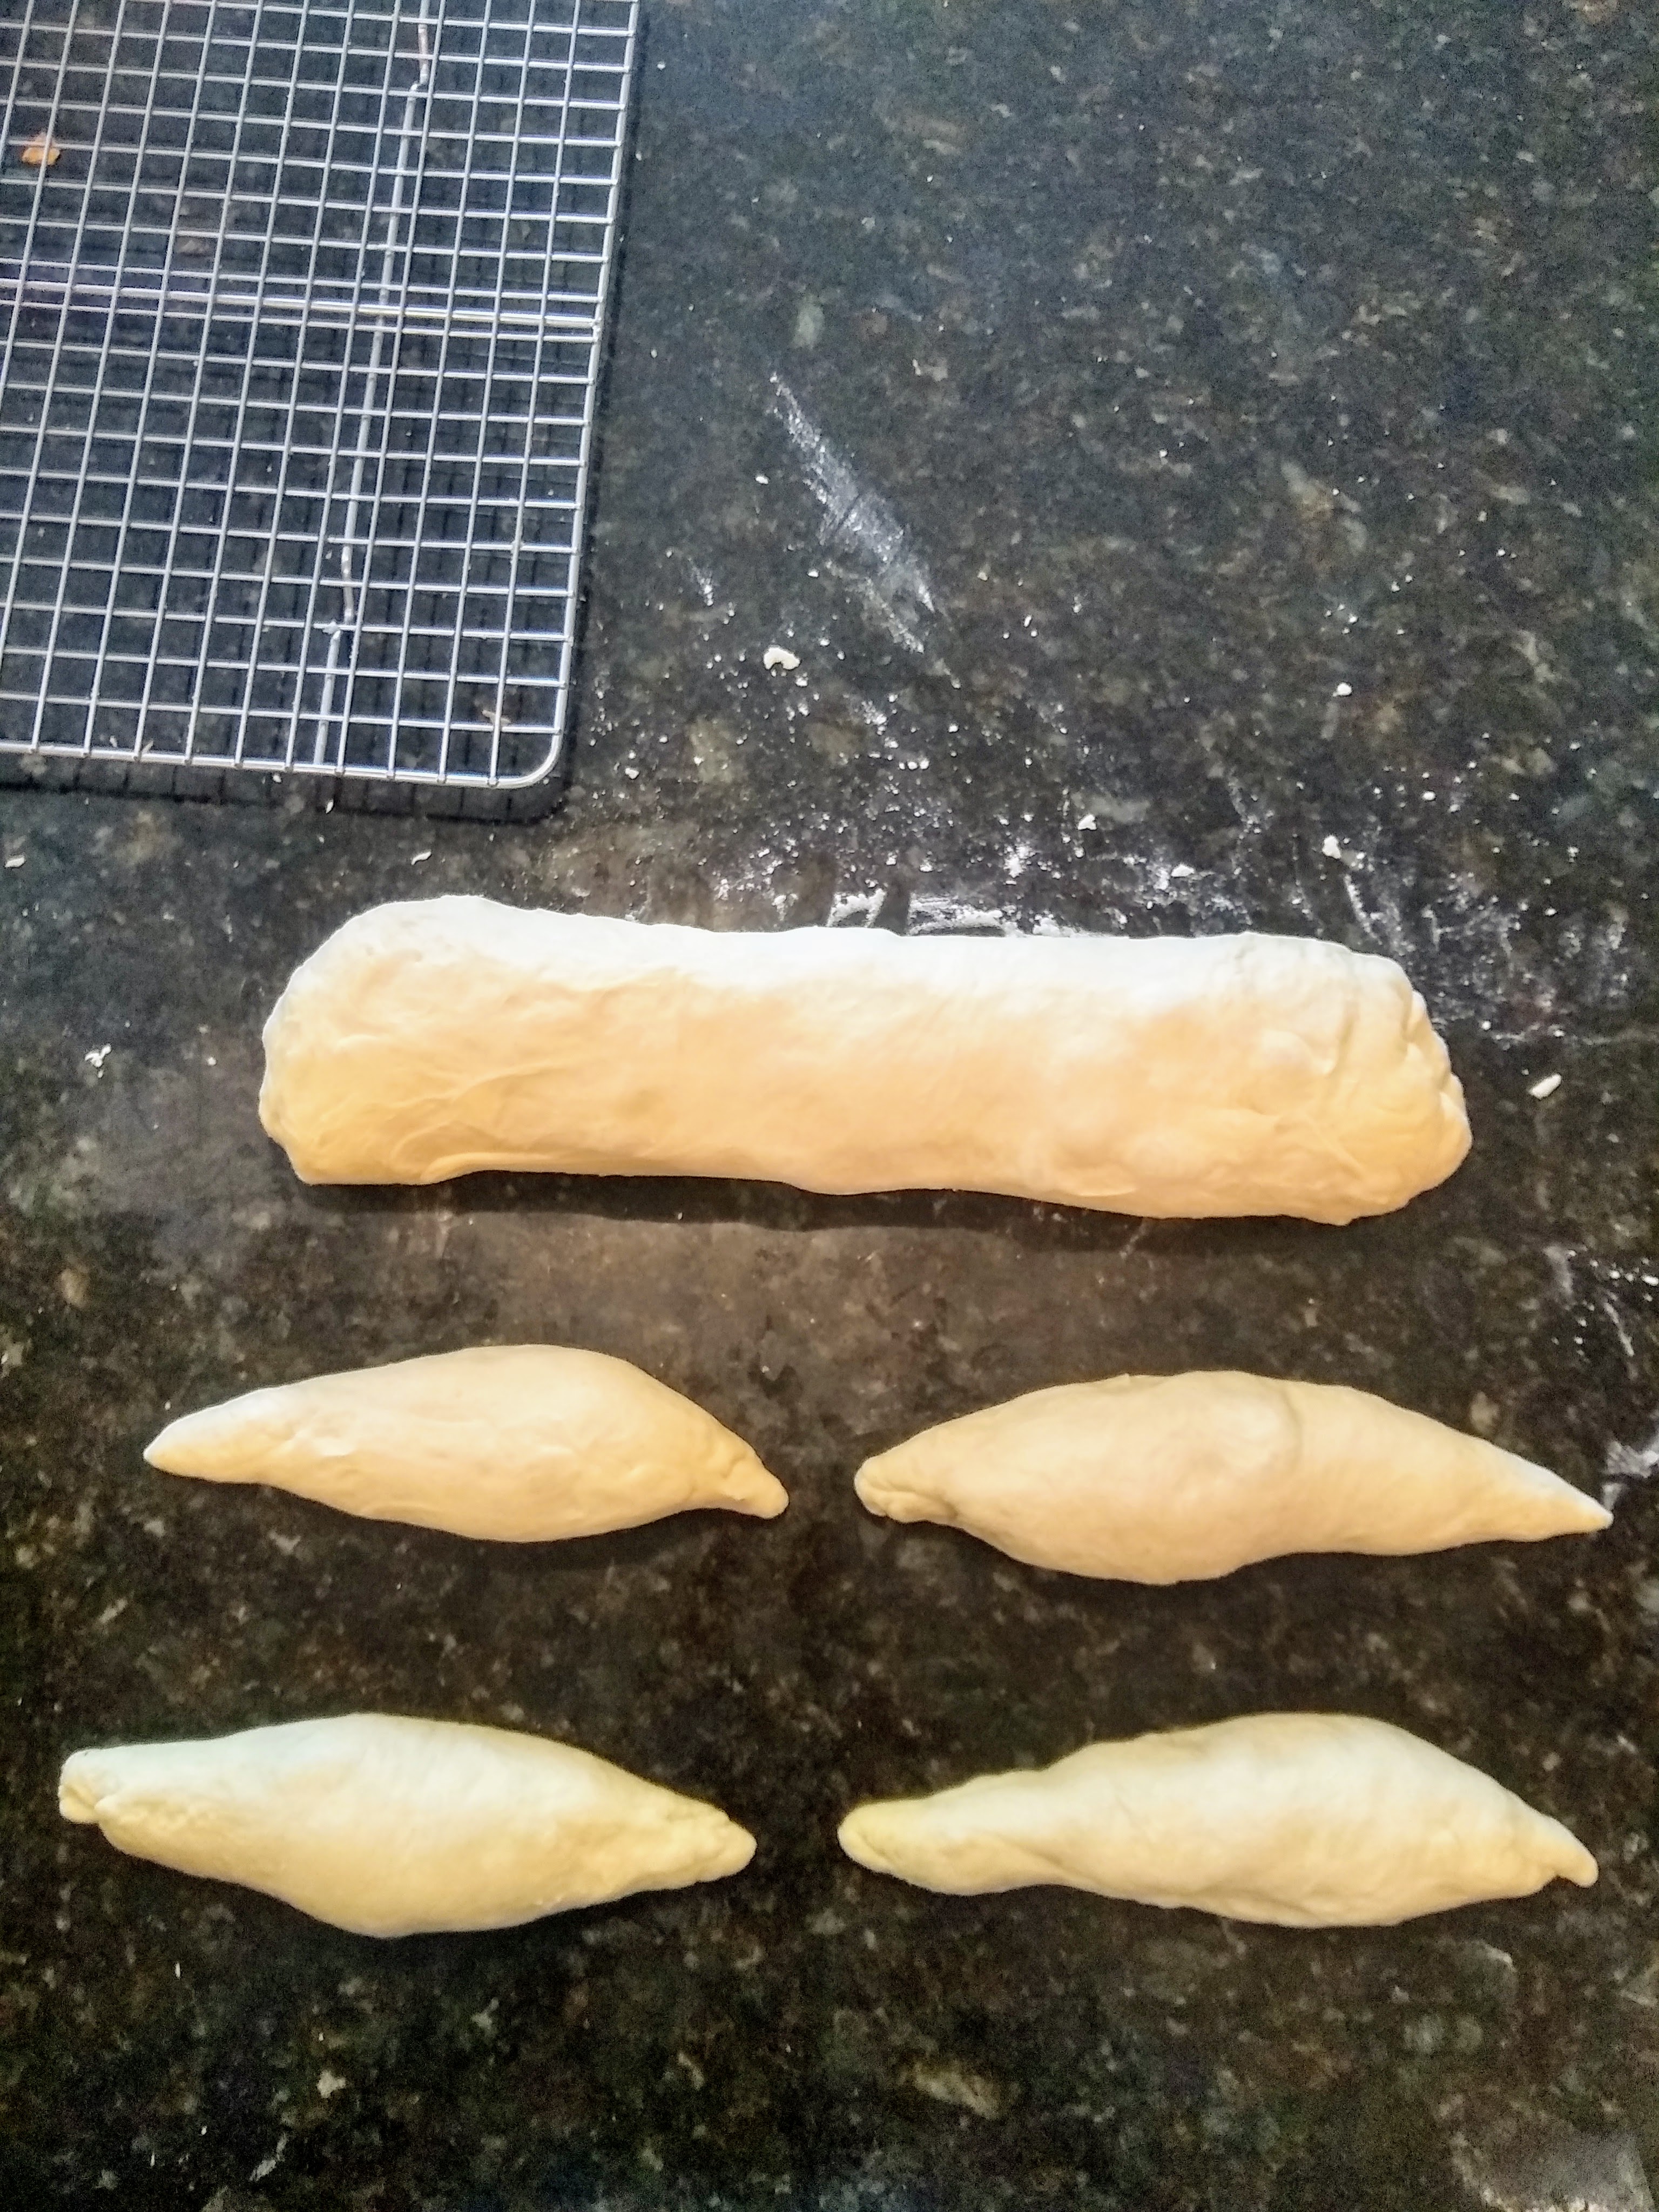 Italian bread, shaped into a large batard and some smaller torpedo rolls